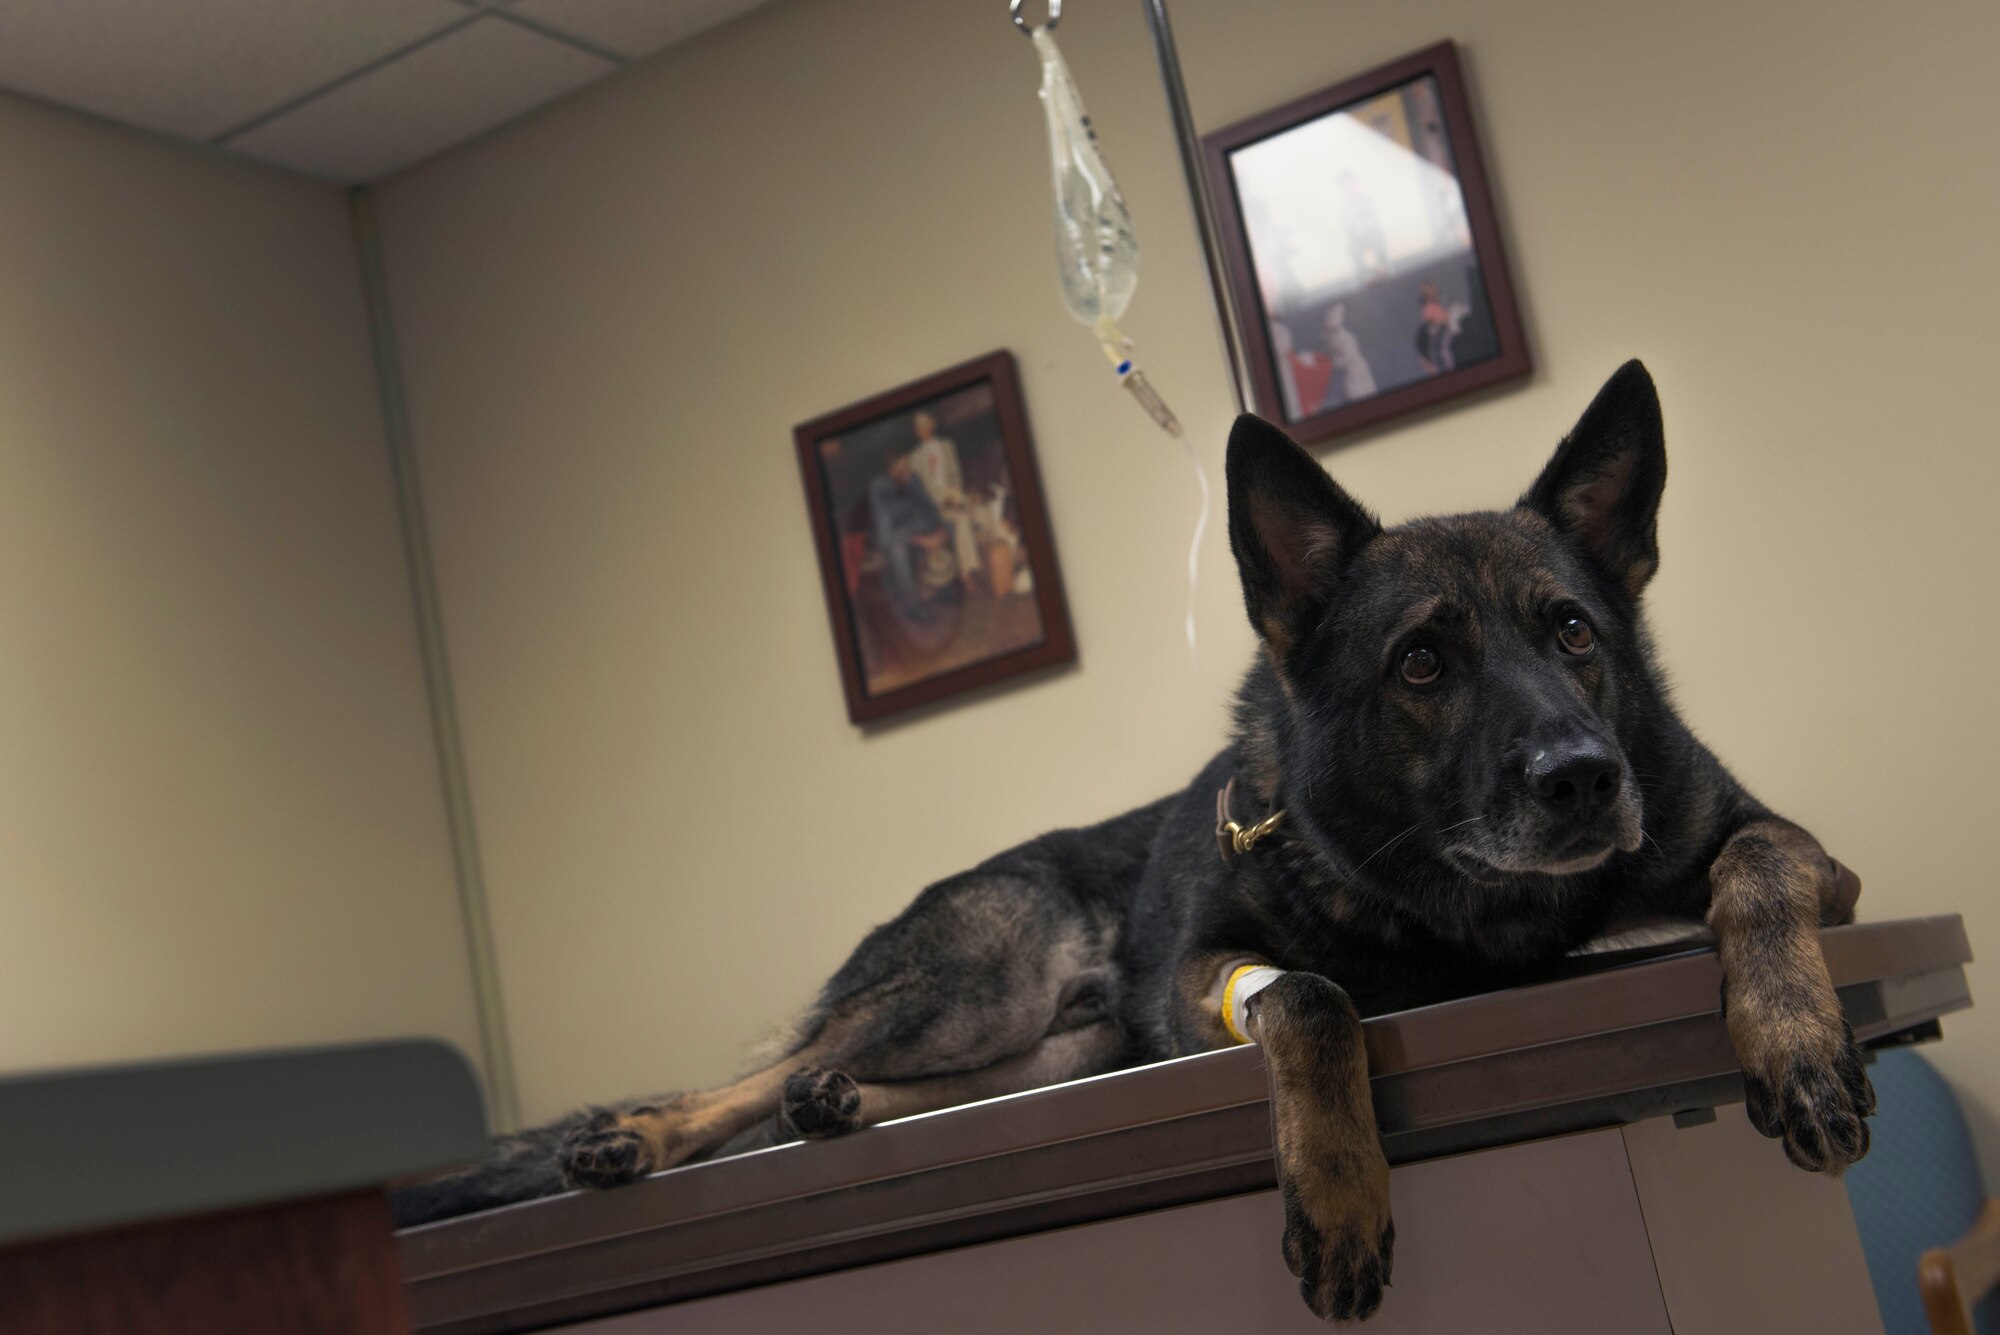 Military working dog Mex, assigned to the 822nd Base Defense Squadron, receives a vitals test during a routine checkup July 16, 2015, at Moody Air Force Base, Ga. Mex’s checkup ensured he was healthy and ready to perform the job of supporting base security. (U.S. Air Force photo/Airman 1st Class Dillian Bamman)